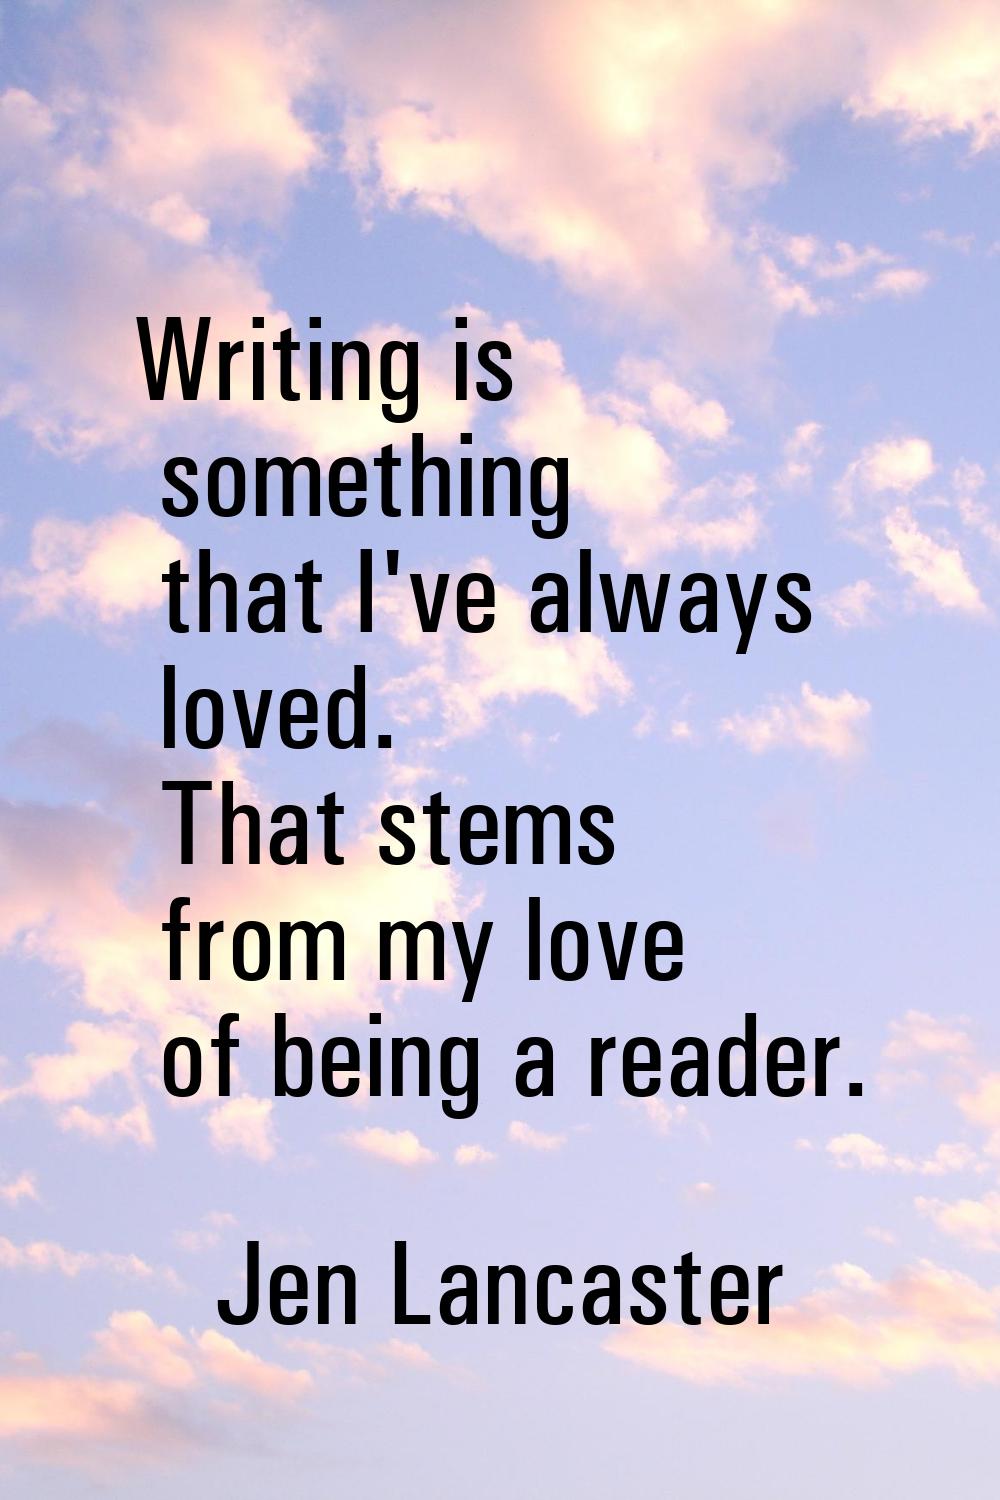 Writing is something that I've always loved. That stems from my love of being a reader.